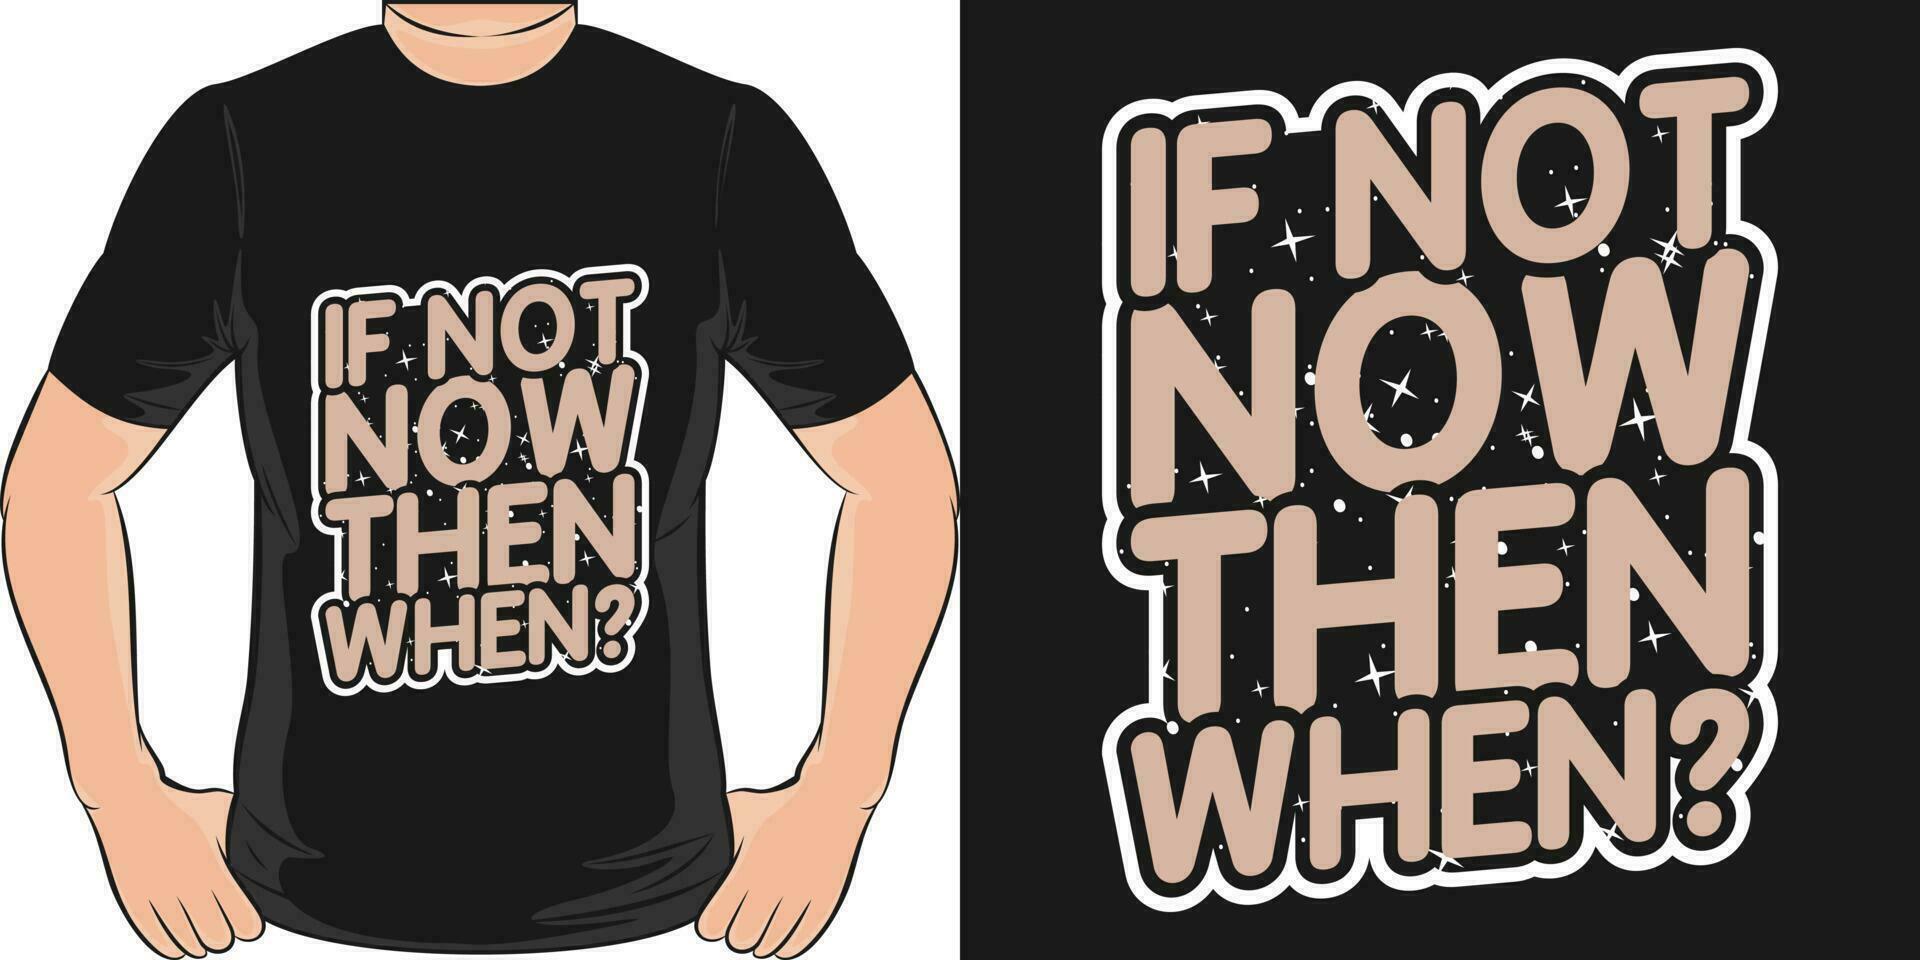 If Not Now Then When, Motivational Quote T-Shirt Design. vector